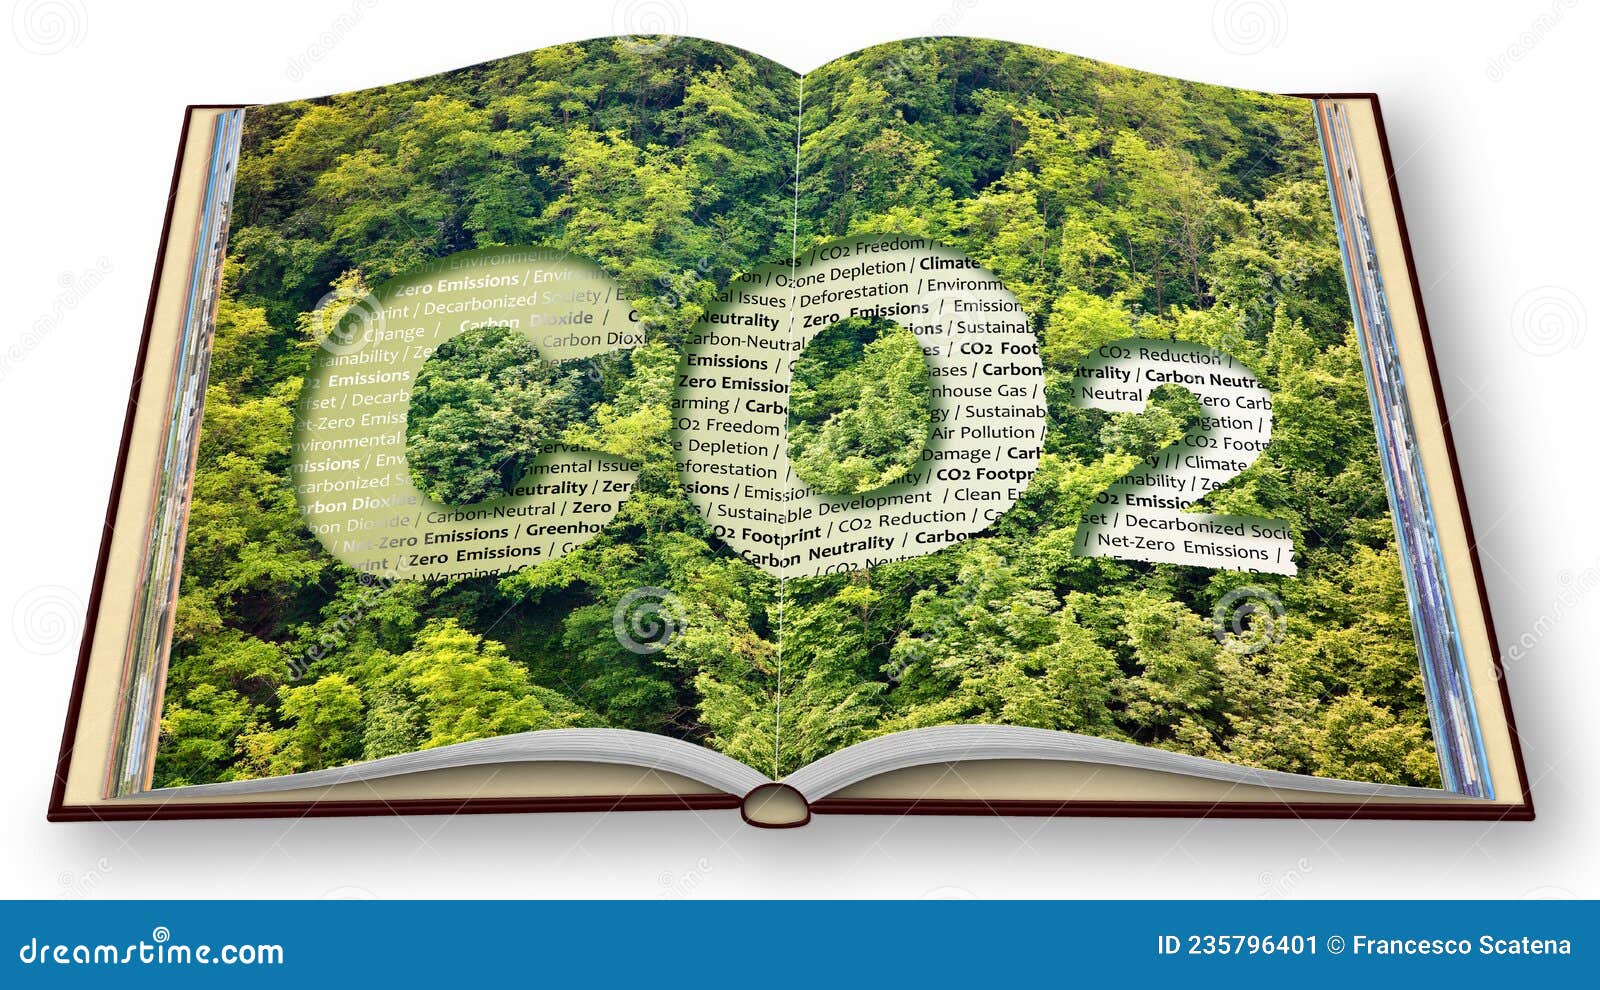 co2 net-zero emission - carbon neutrality concept against a forest with keywords - 3d render of an opened photo book  on